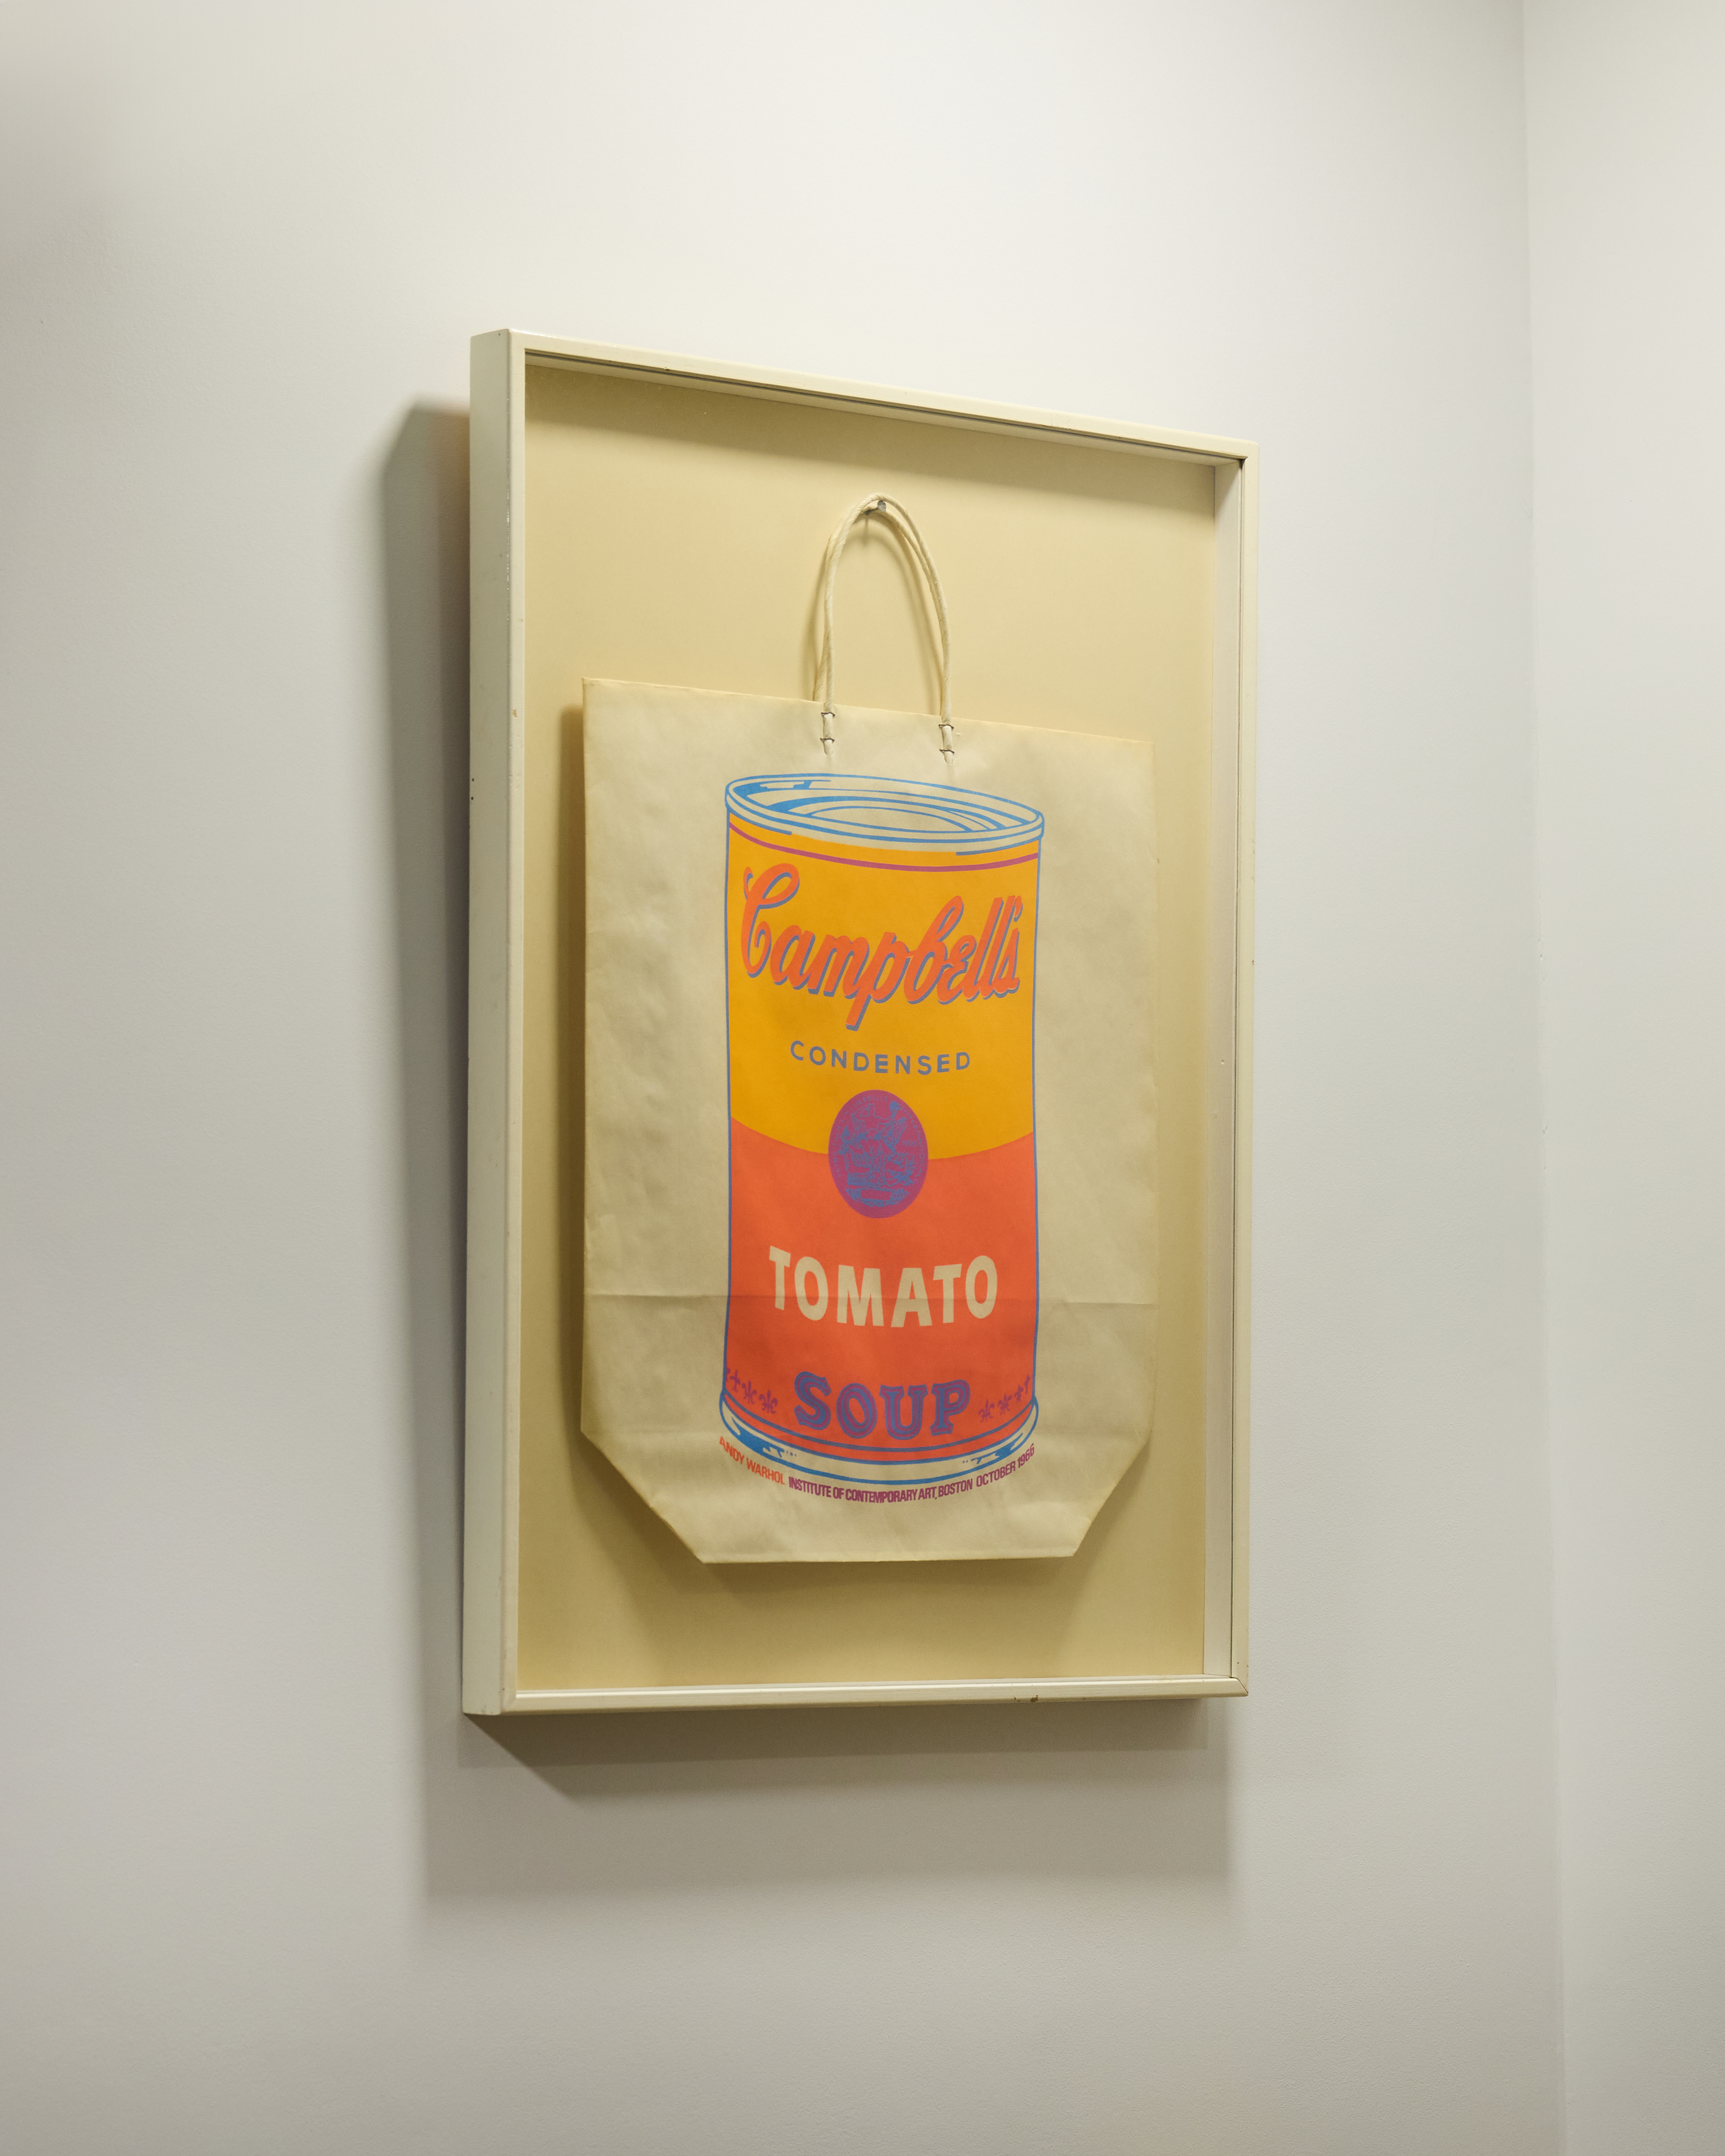 Beyond the Brand Andy Warhol at Halcyon Gallery - Andy Warhol Campbell's Soup Can, 1964